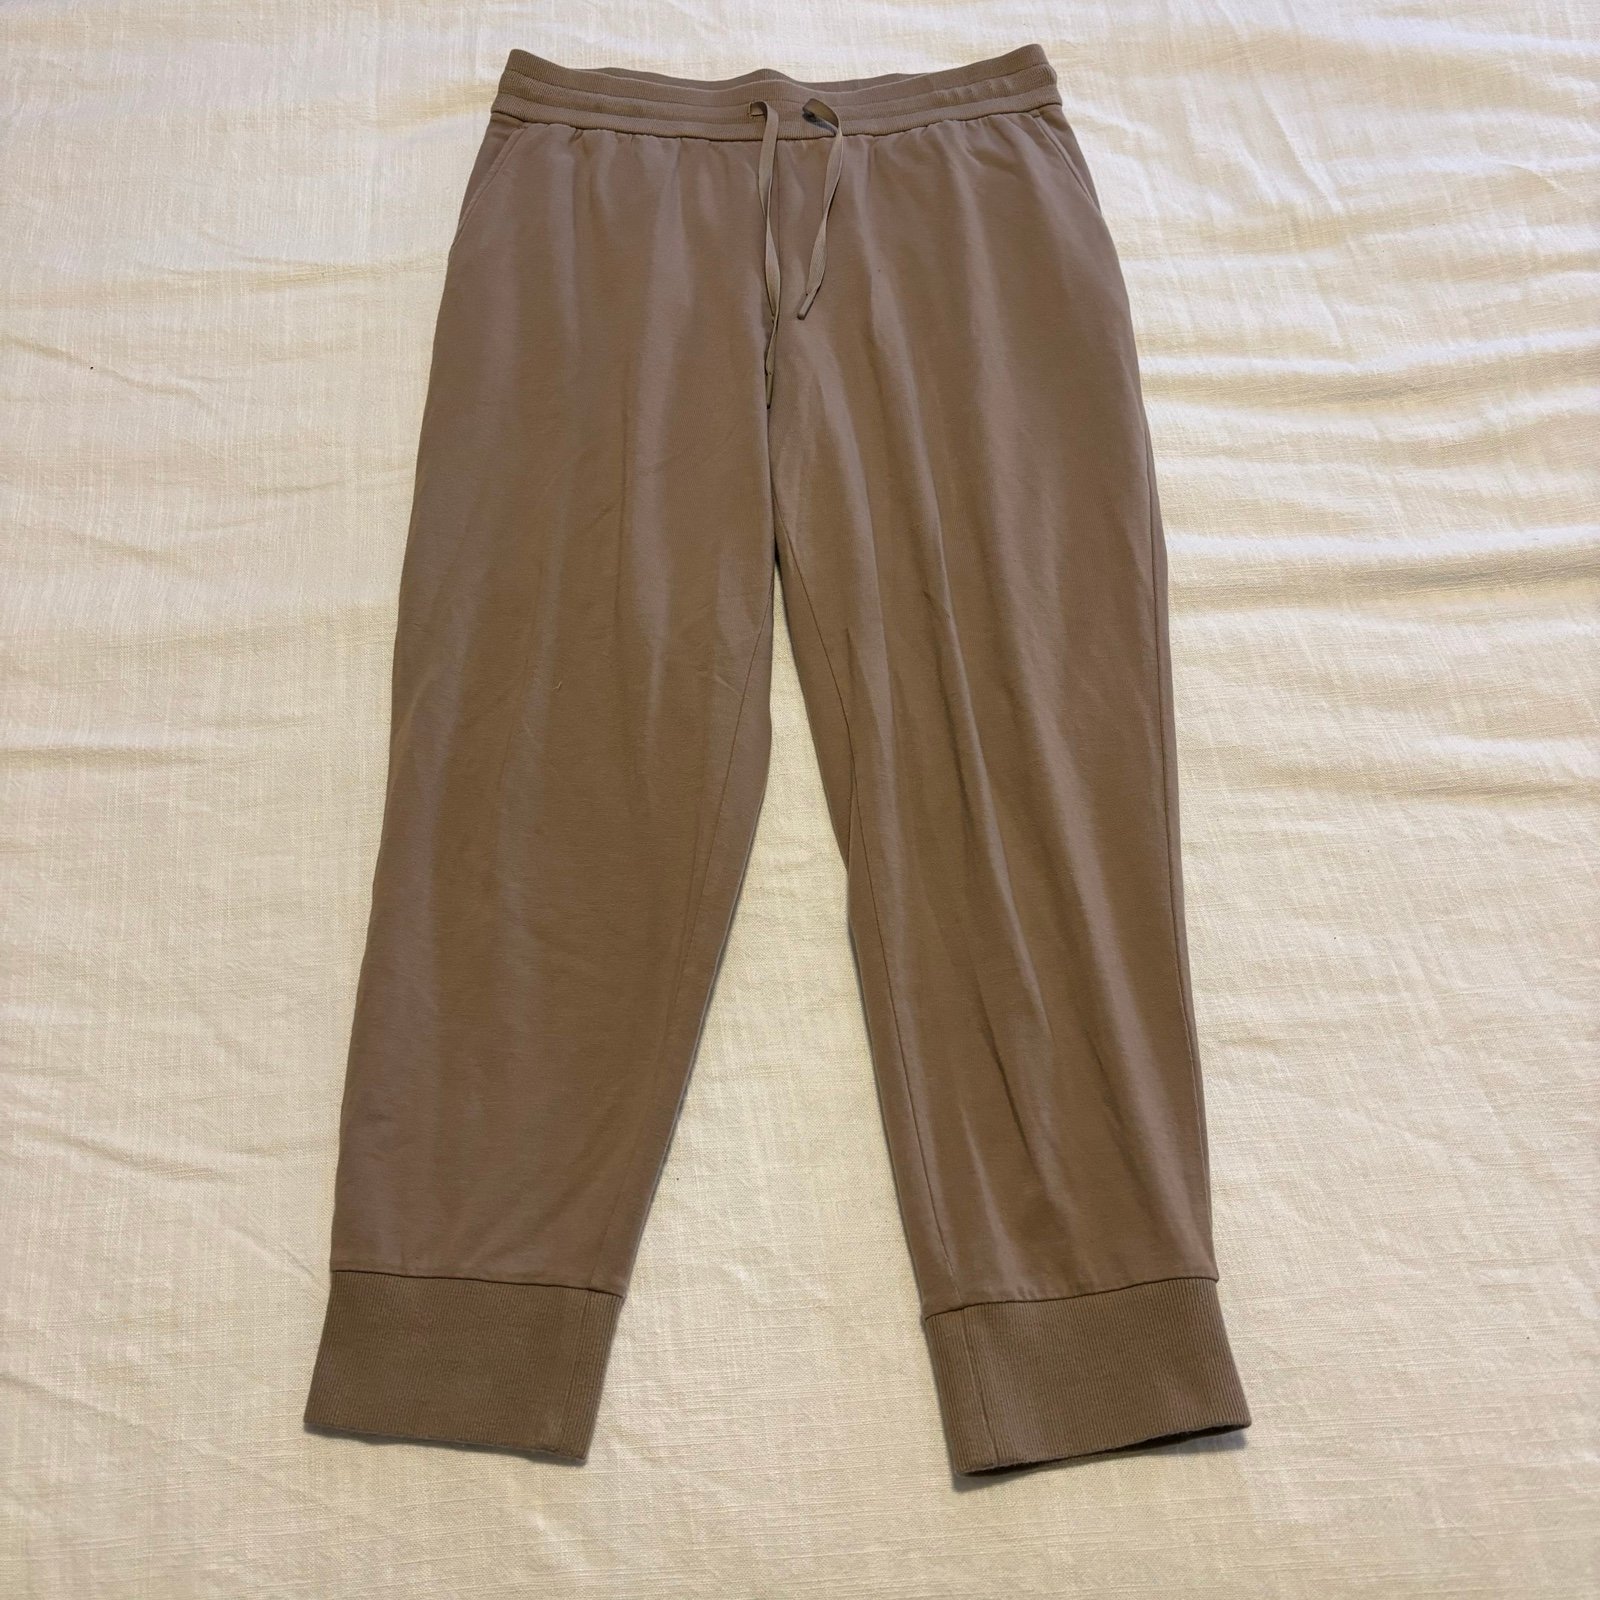 Eileen Fisher Tan Jogger Lounge Pants F60VSp5A7